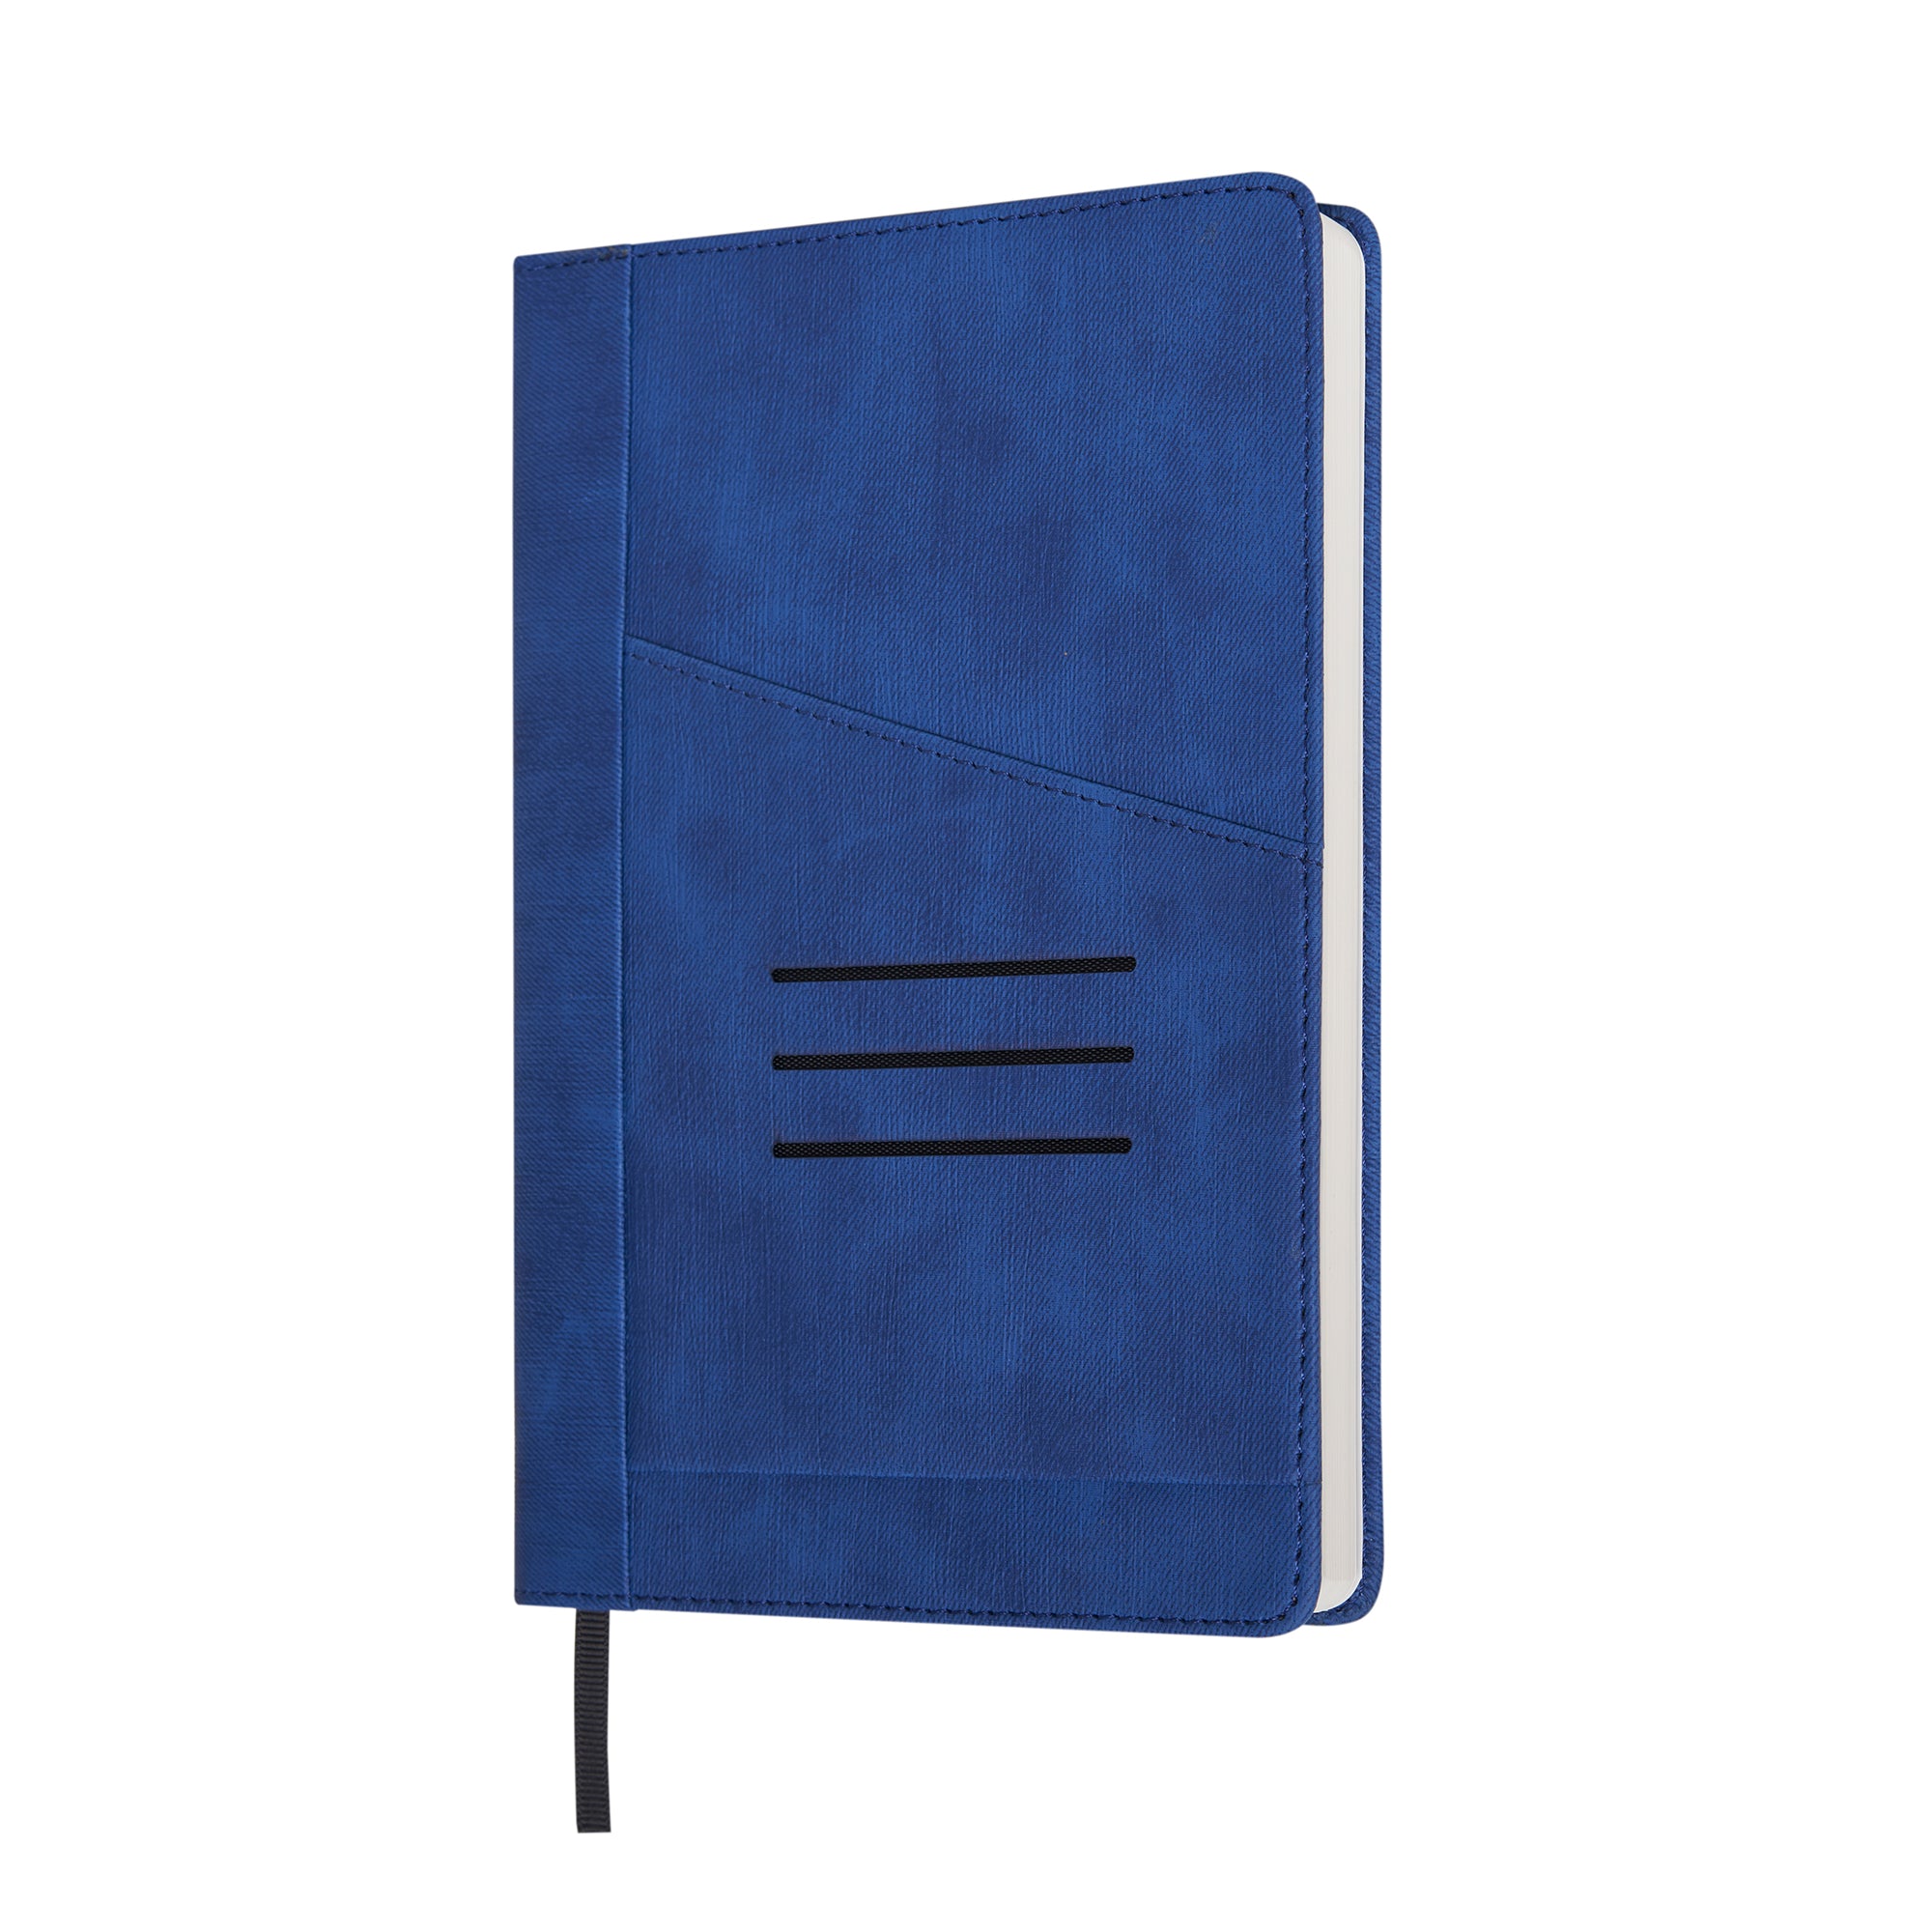 Personalized Graham A5 Hard Bound Executive Notebook - Blue